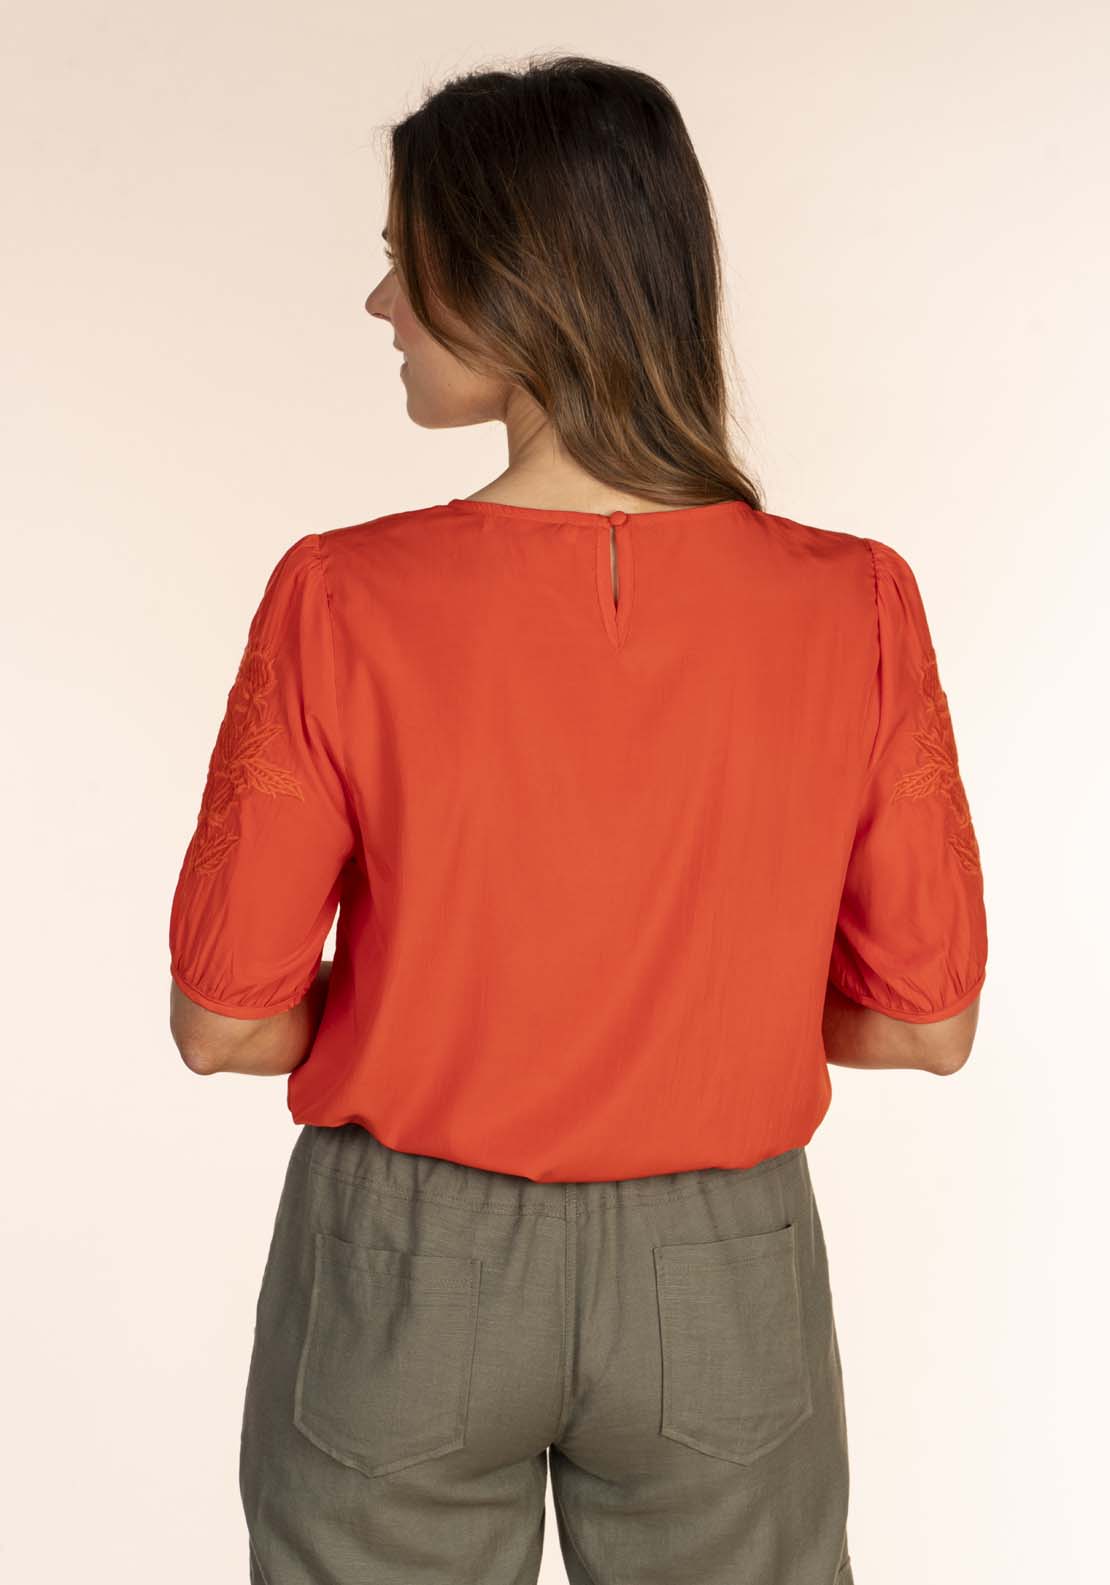 Naoise Embroidered Blouse - Orange 4 Shaws Department Stores